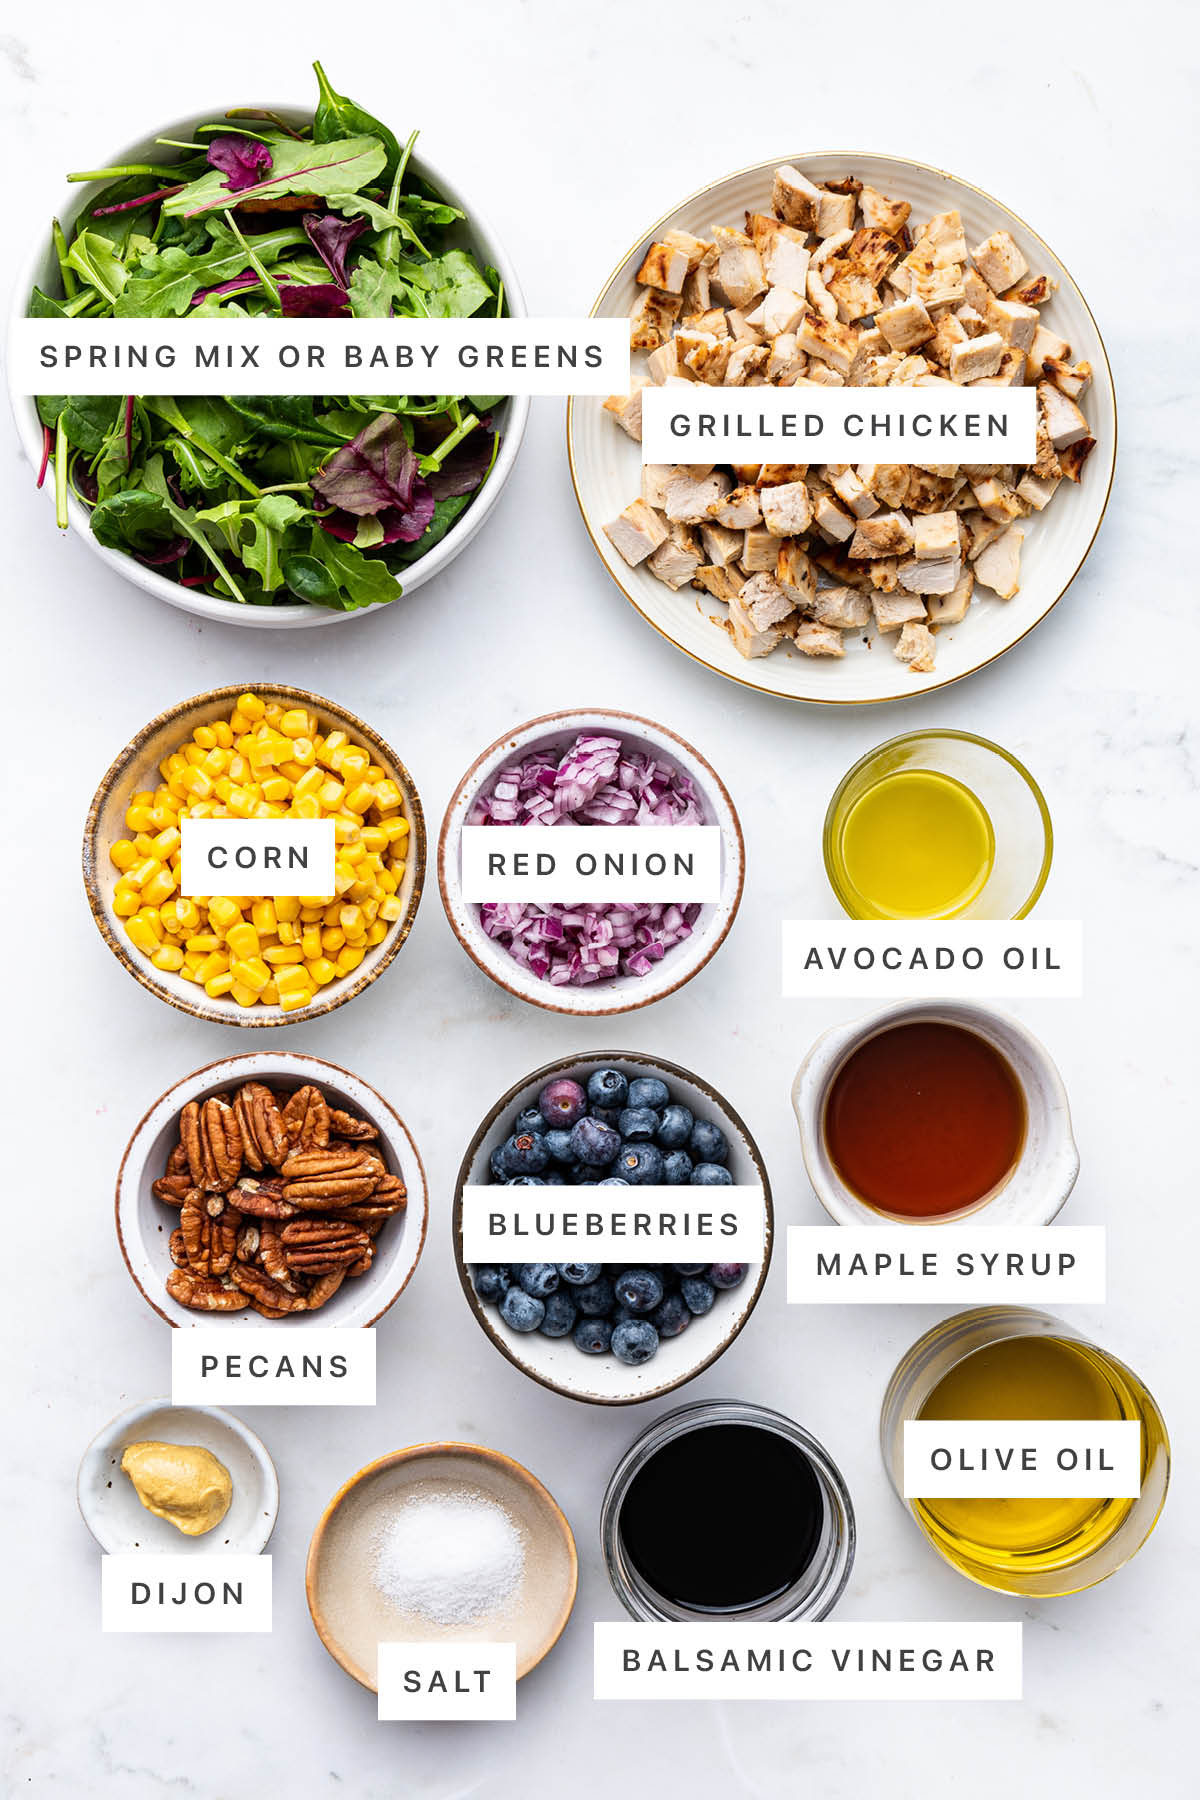 Ingredients measured out to make Blueberry Corn Chicken Salad: spring mix, grilled chicken, corn, red onion, avocado oil, pecans, blueberries, maple syrup, dijon, salt, balsamic vinegar and olive oil.